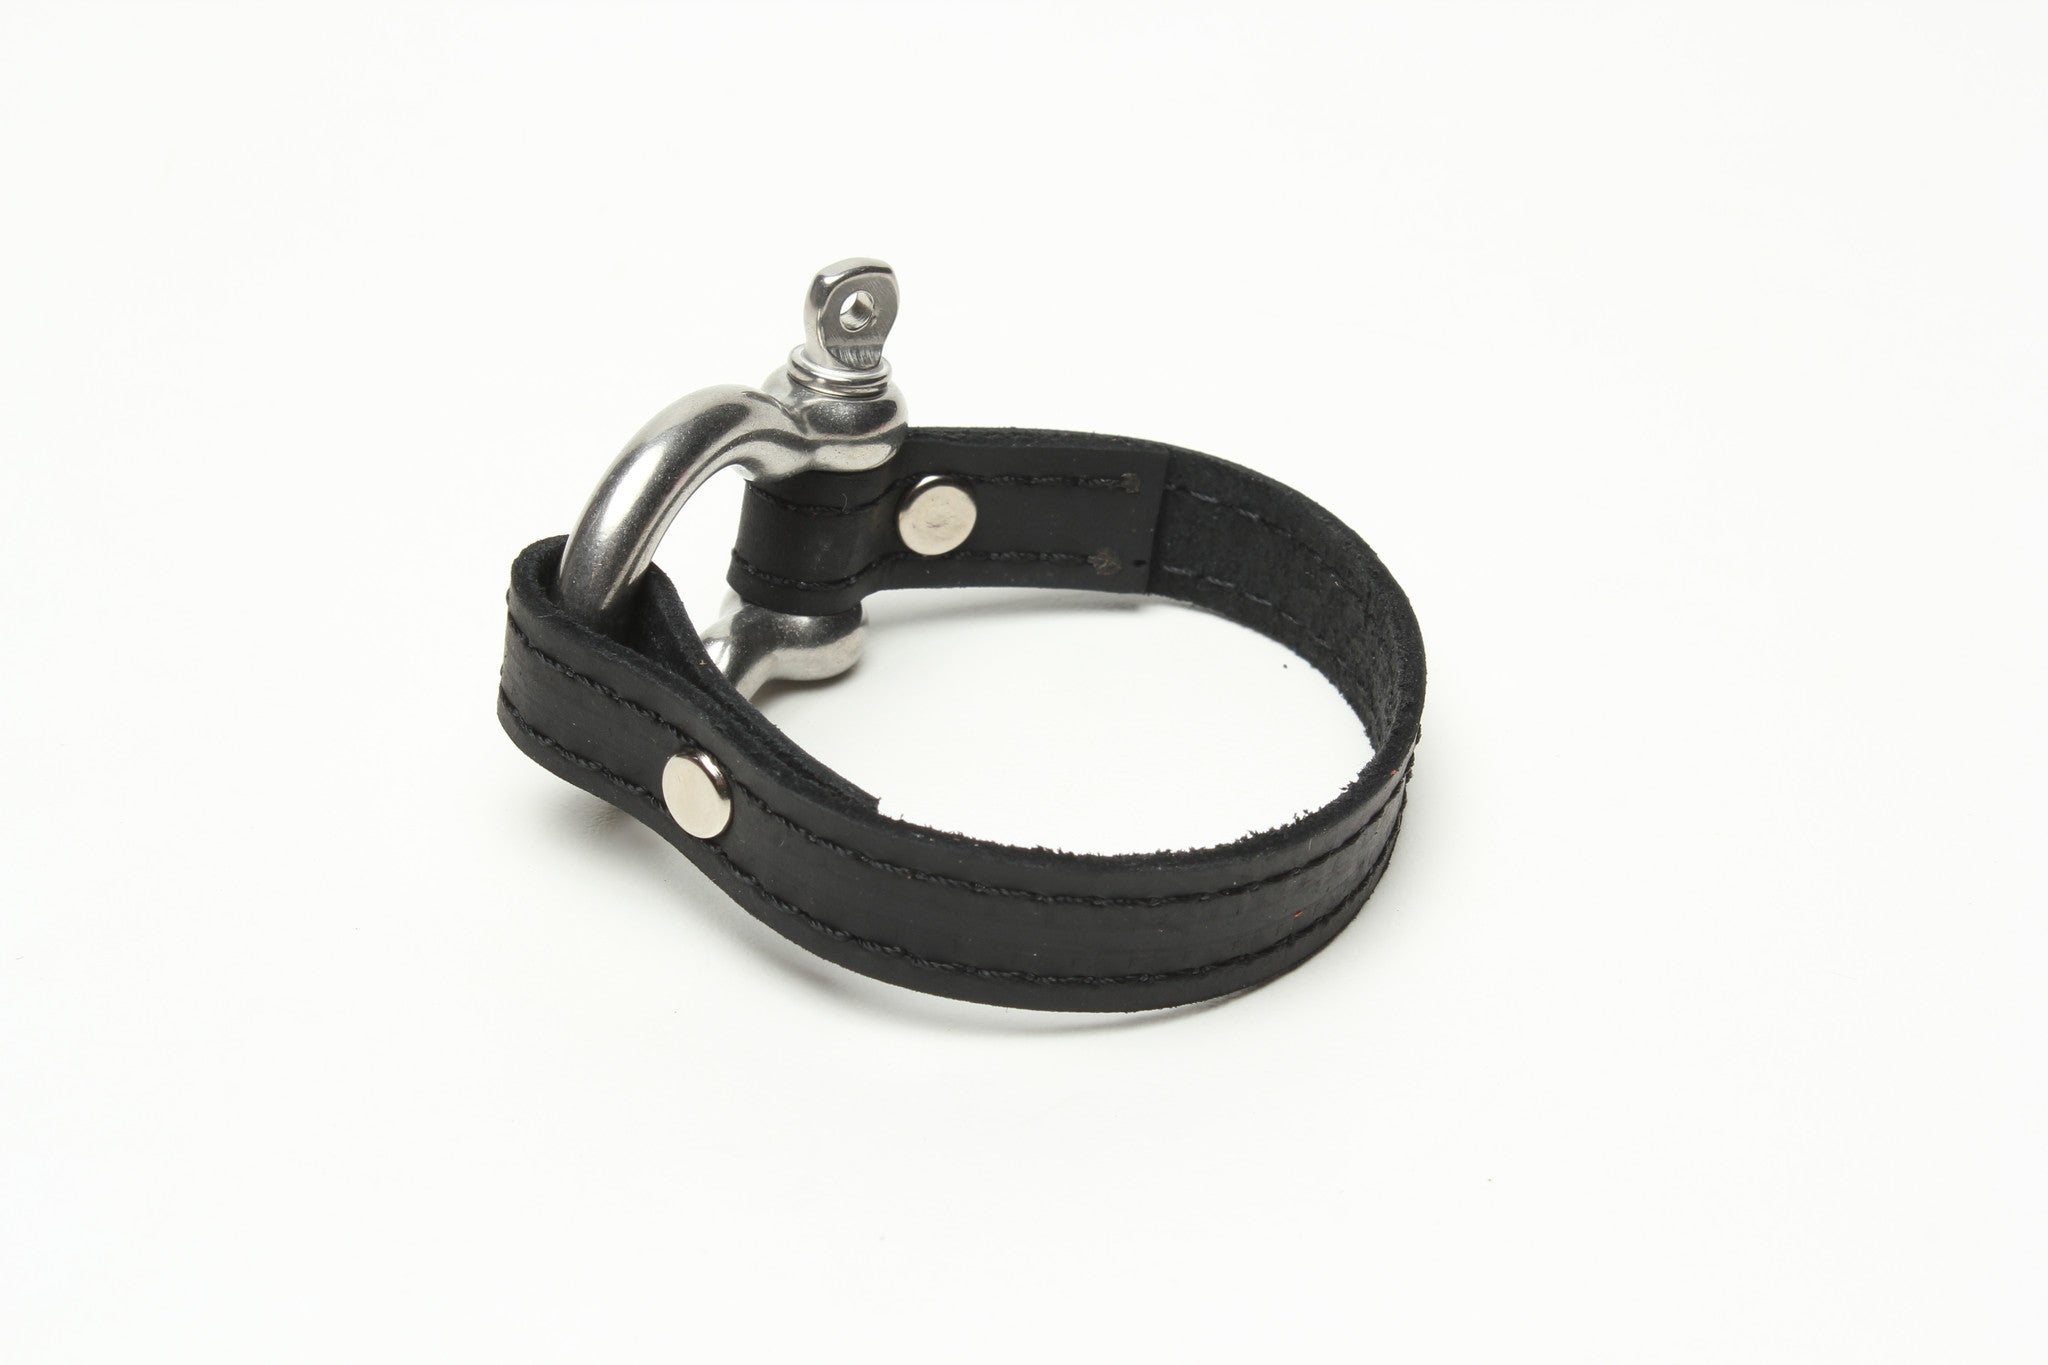 SIGNATURE STITCHED LEATHER AND STAINLESS STEEL SHACKLE BY NYET JEWELRY.